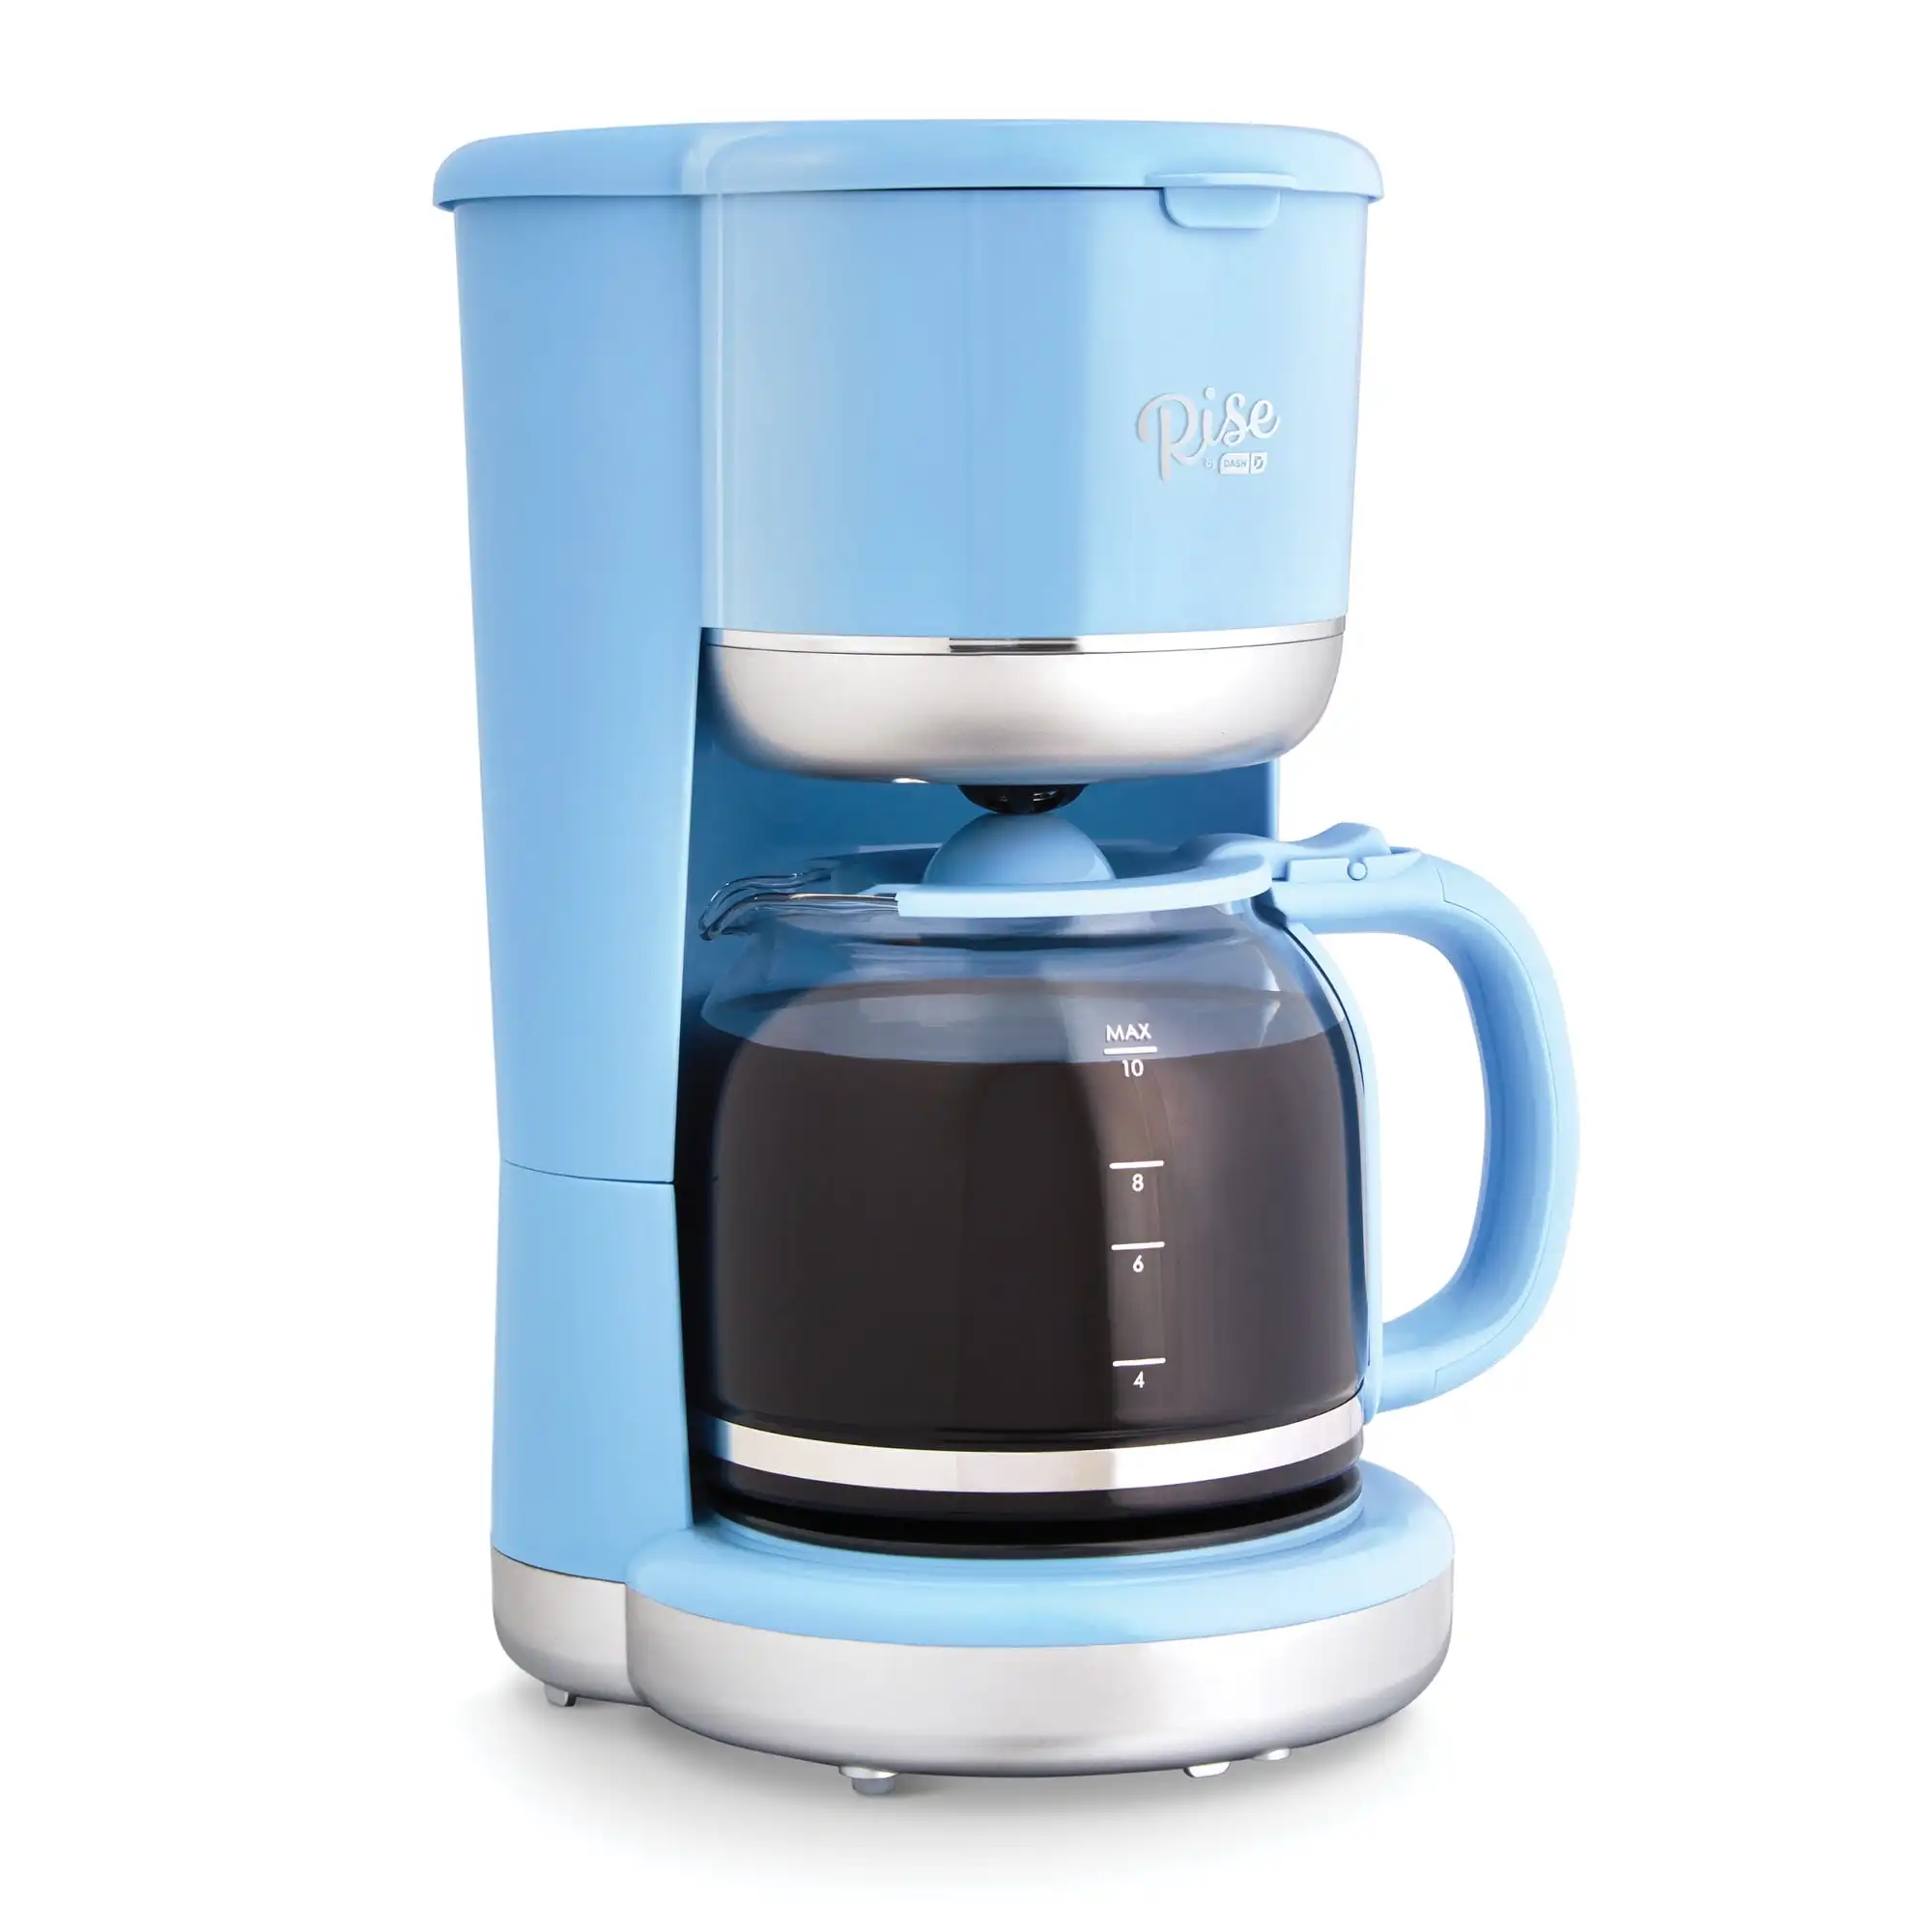 

Rise By Dash Drip Coffee Maker, Reusable Mesh Filter Basket Glass Carafe 10 Cups - Blue Coffe Machine